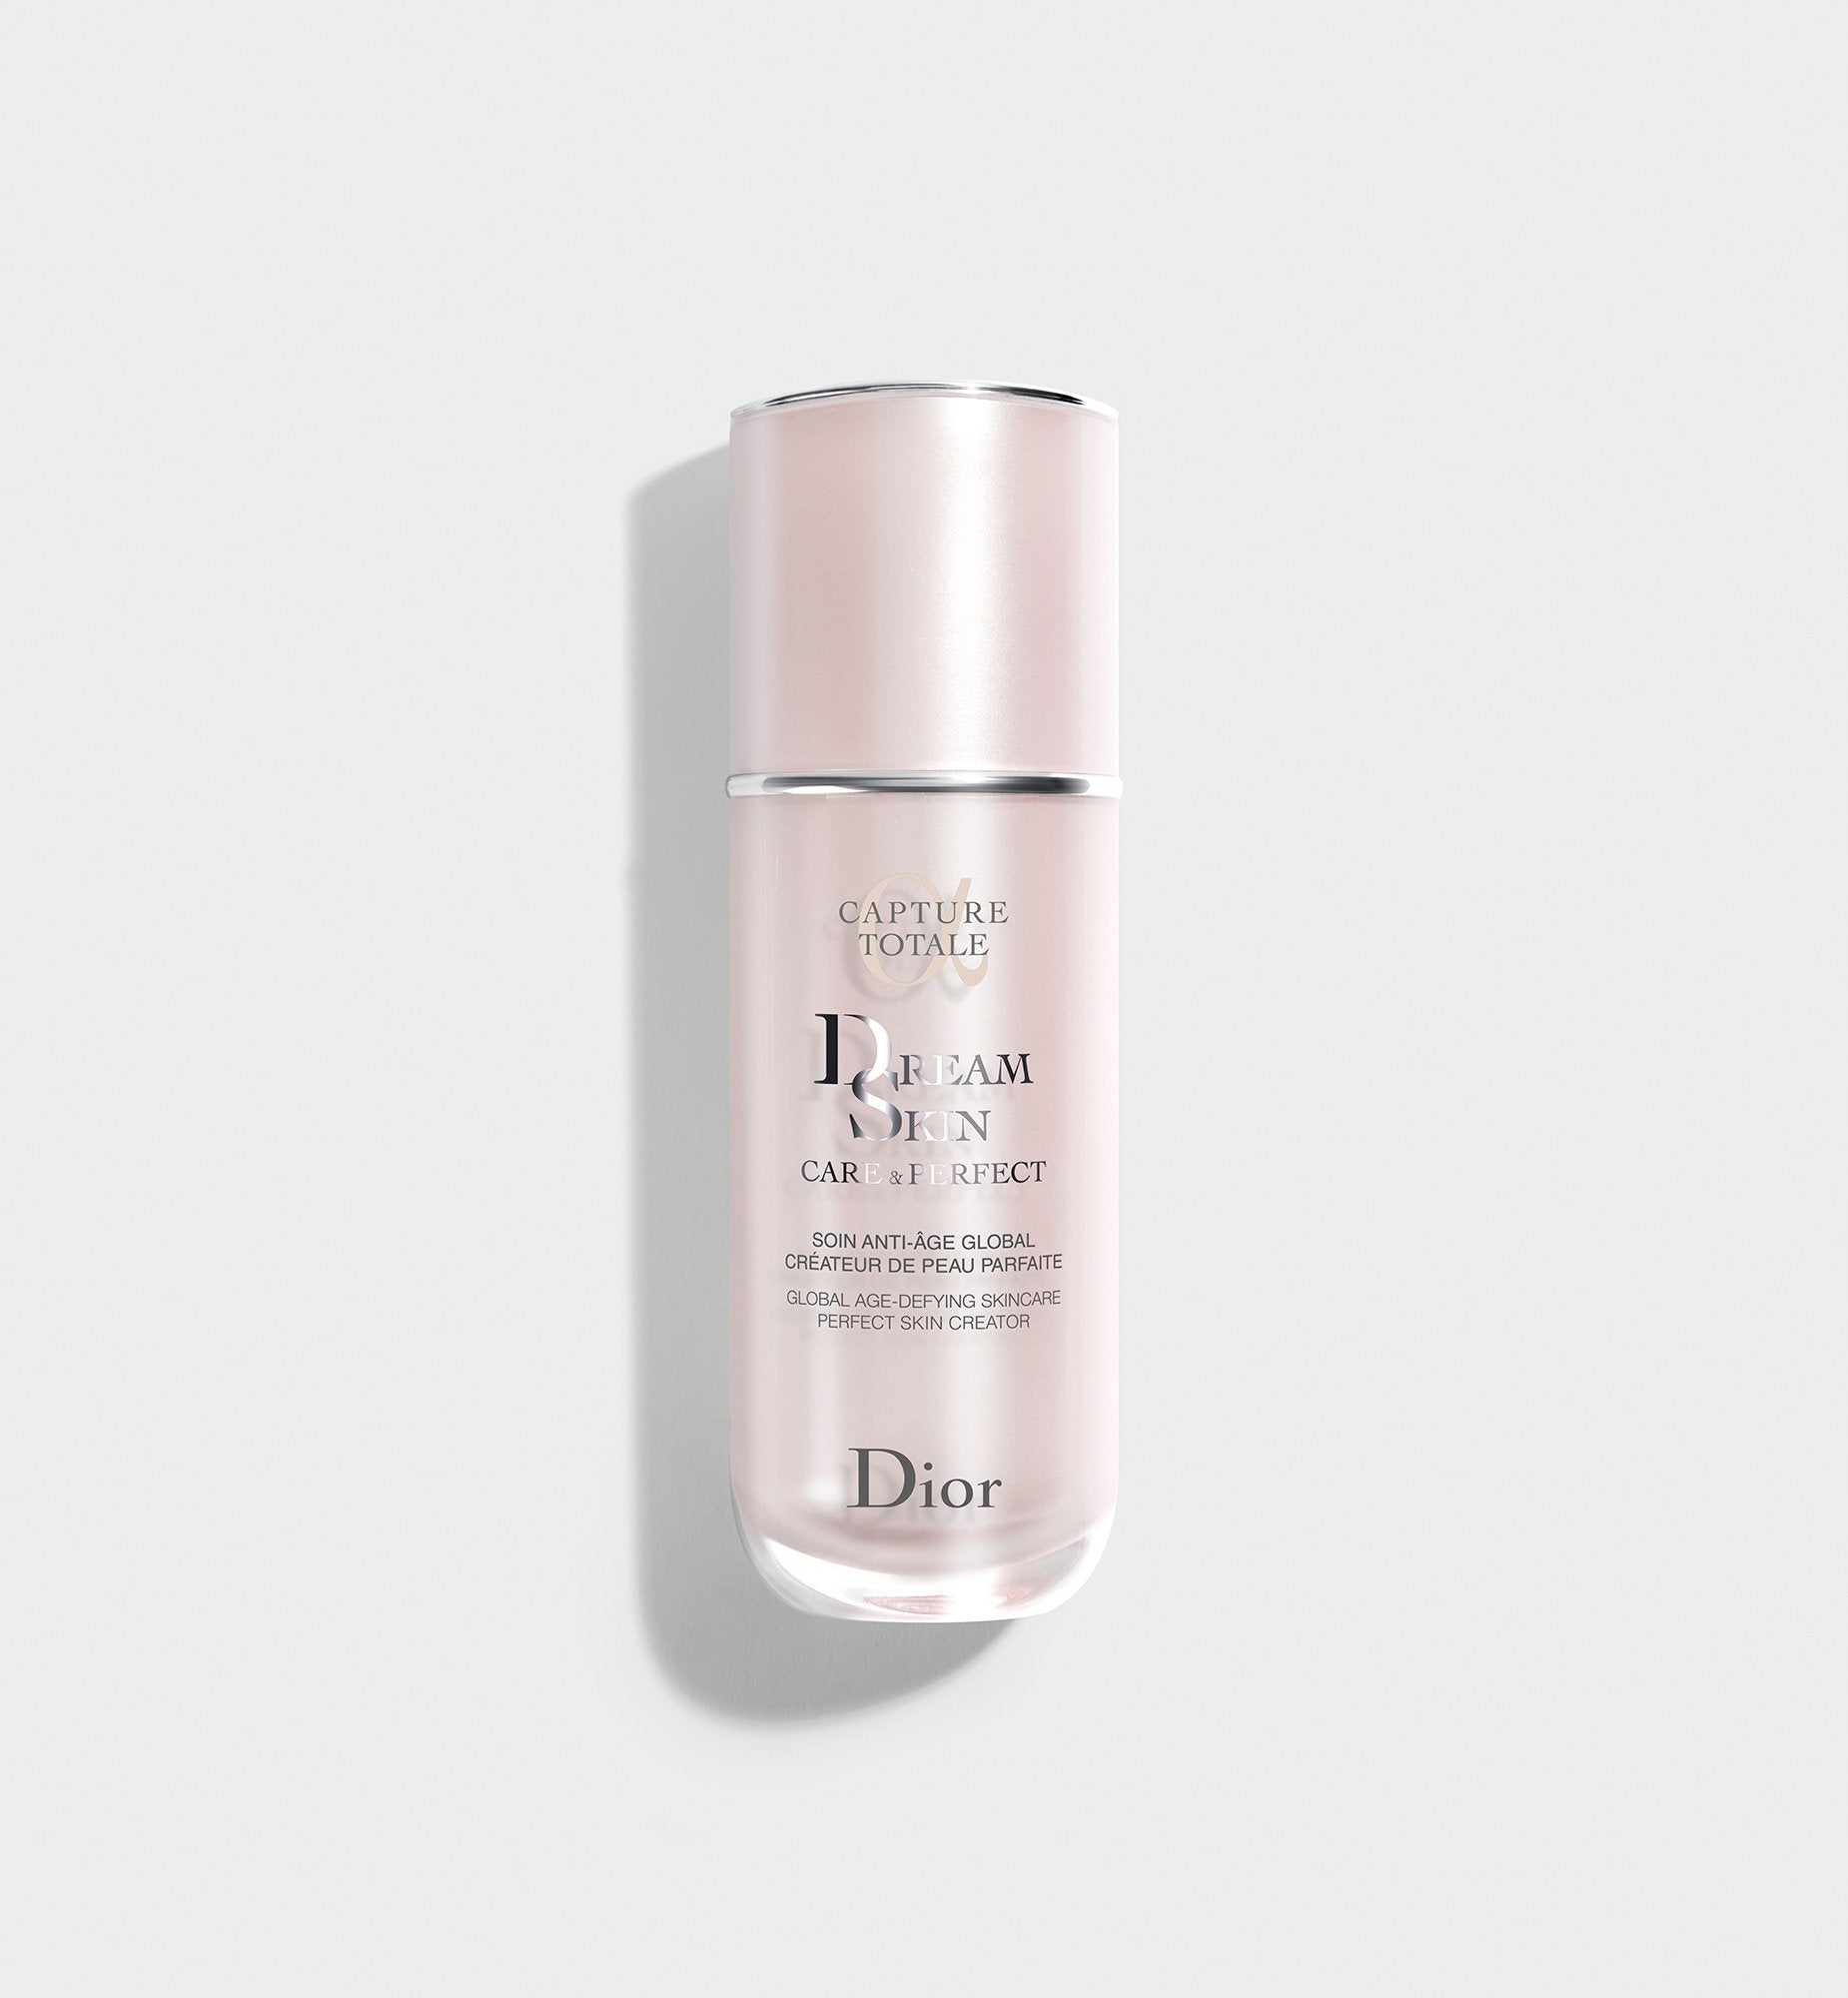 DIOR Capture Dreamskin Care  Perfect Global AgeDefying Skincare Perfect  Skin Creator  MYER